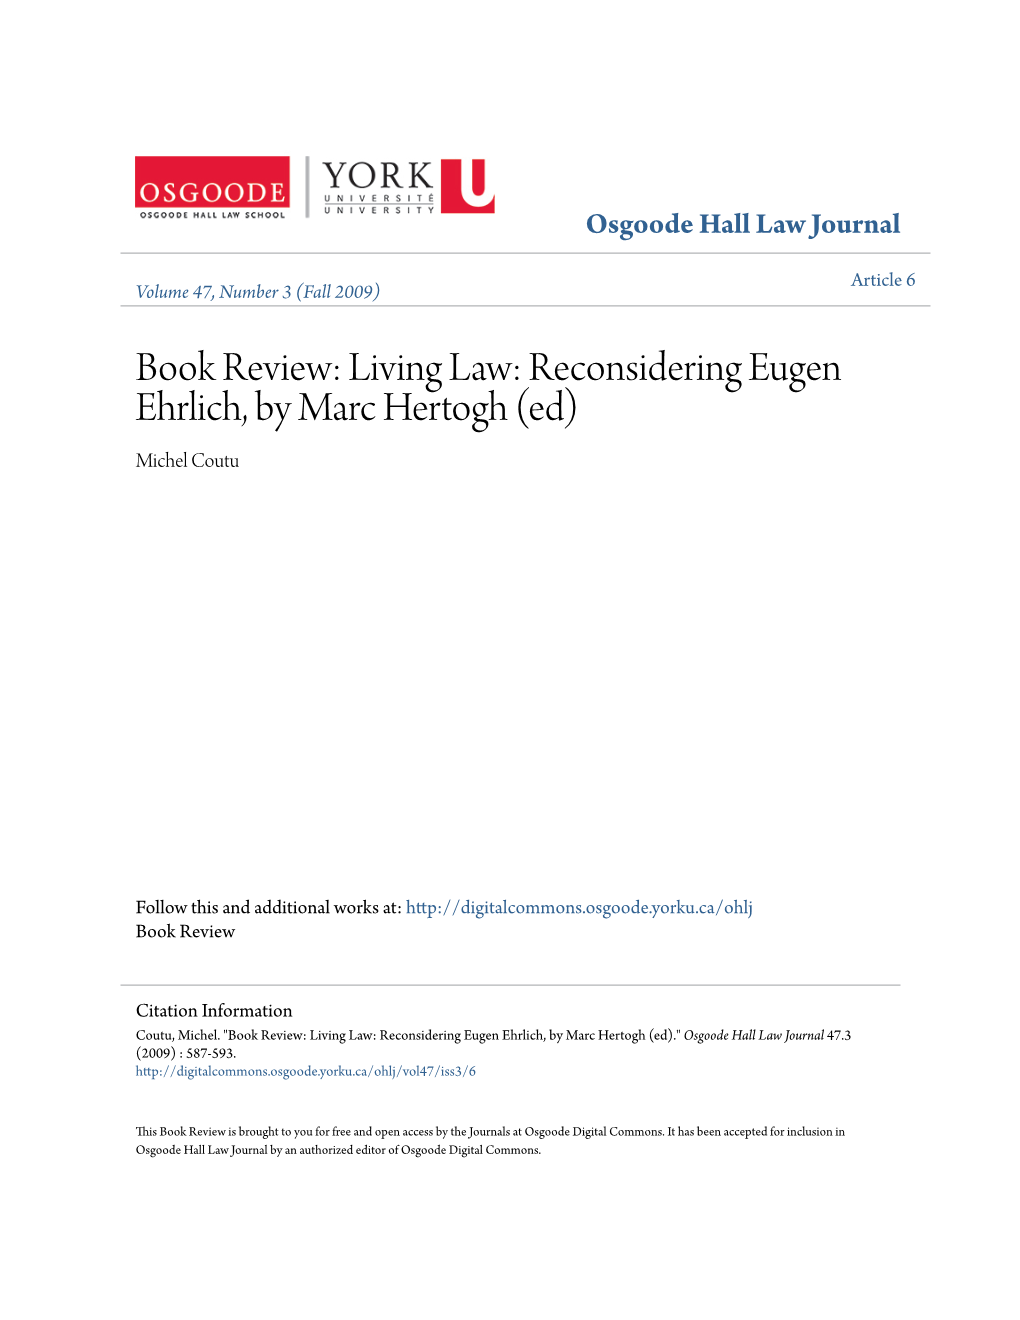 Book Review: Living Law: Reconsidering Eugen Ehrlich, by Marc Hertogh (Ed) Michel Coutu